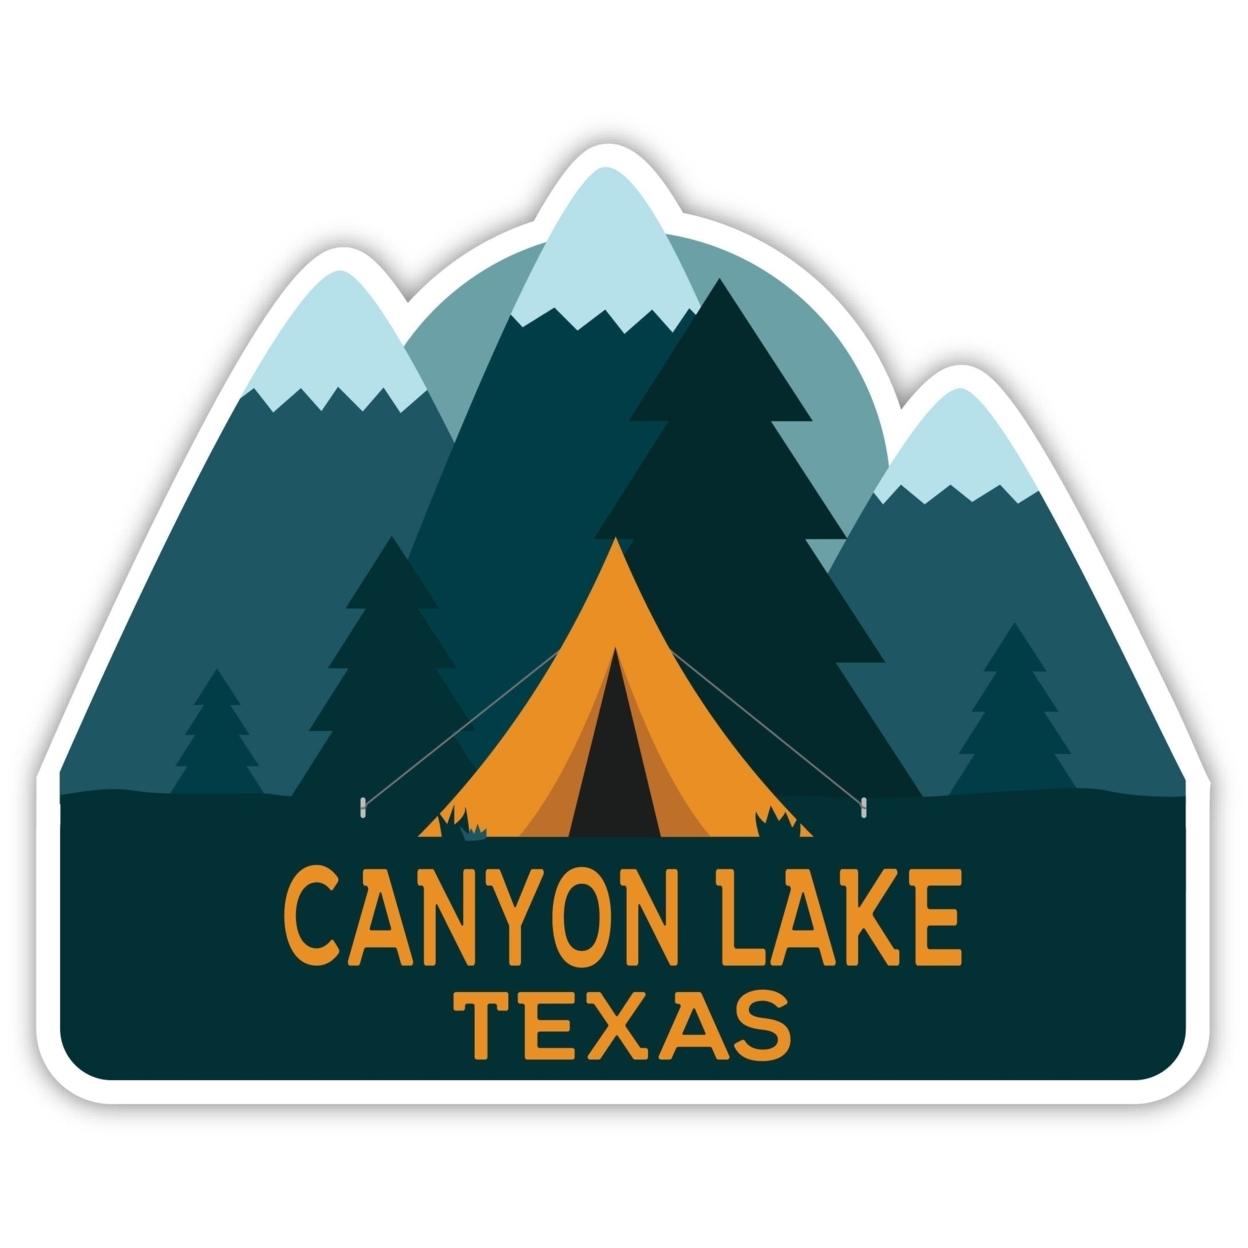 Canyon Lake Texas Souvenir Decorative Stickers (Choose Theme And Size) - 4-Pack, 8-Inch, Tent